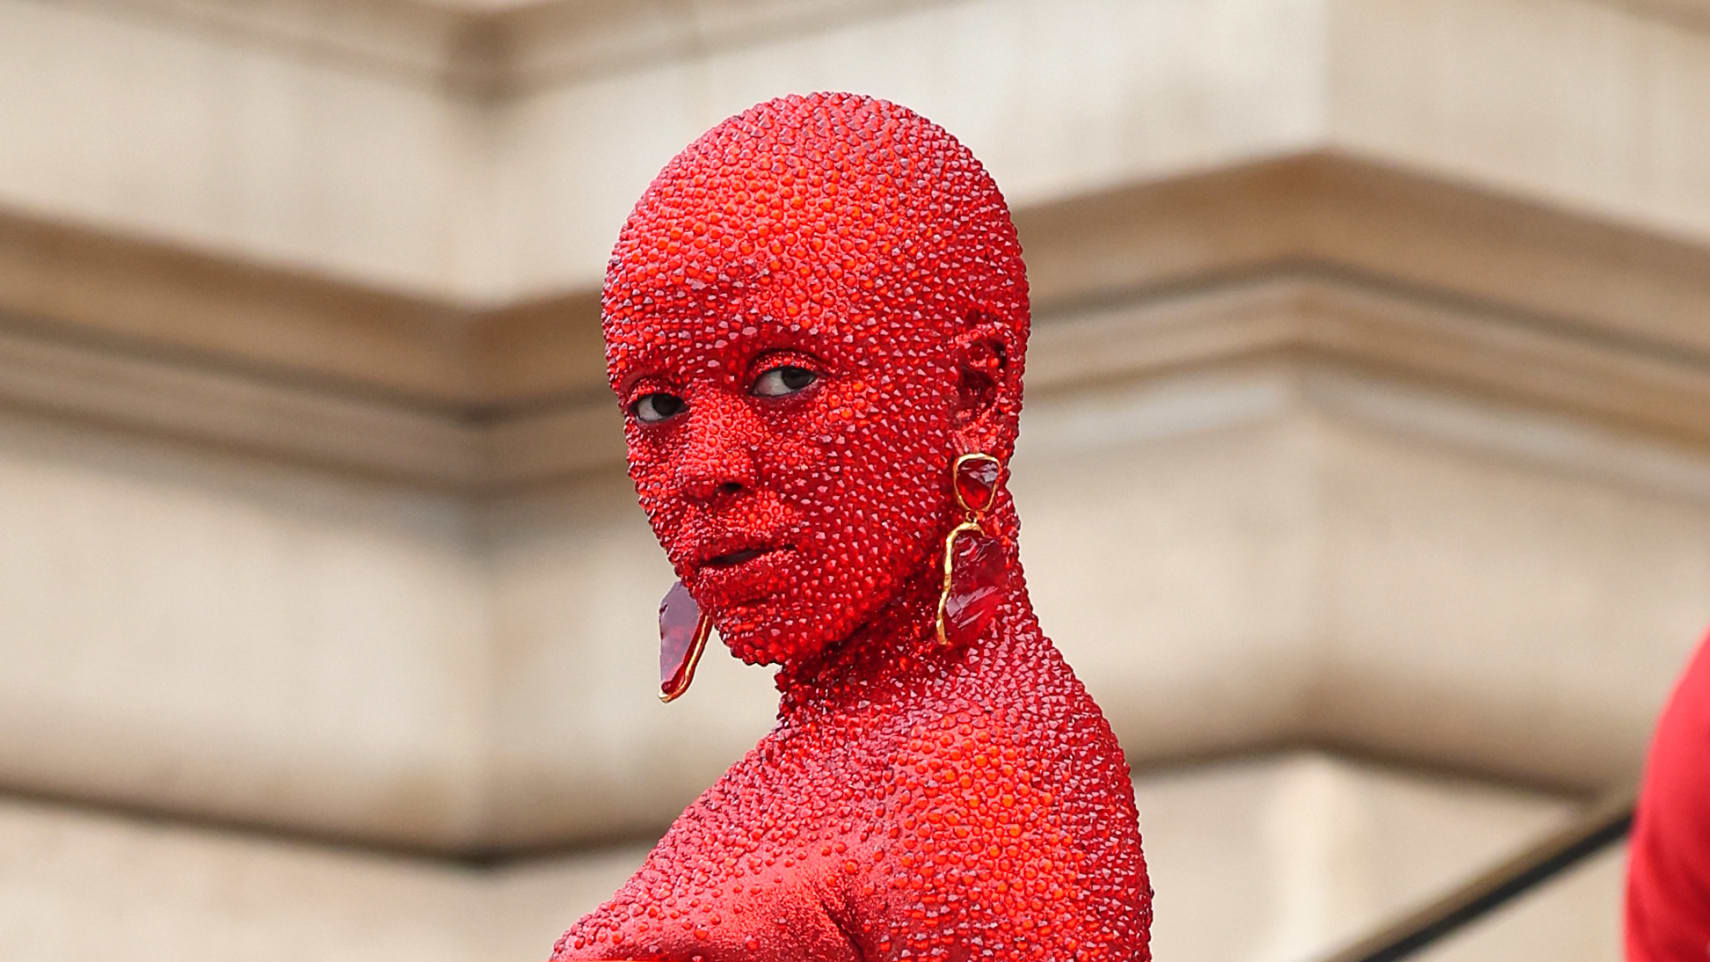 Doja Cat covers herself in red paint and 30,000 crystals for a fashion